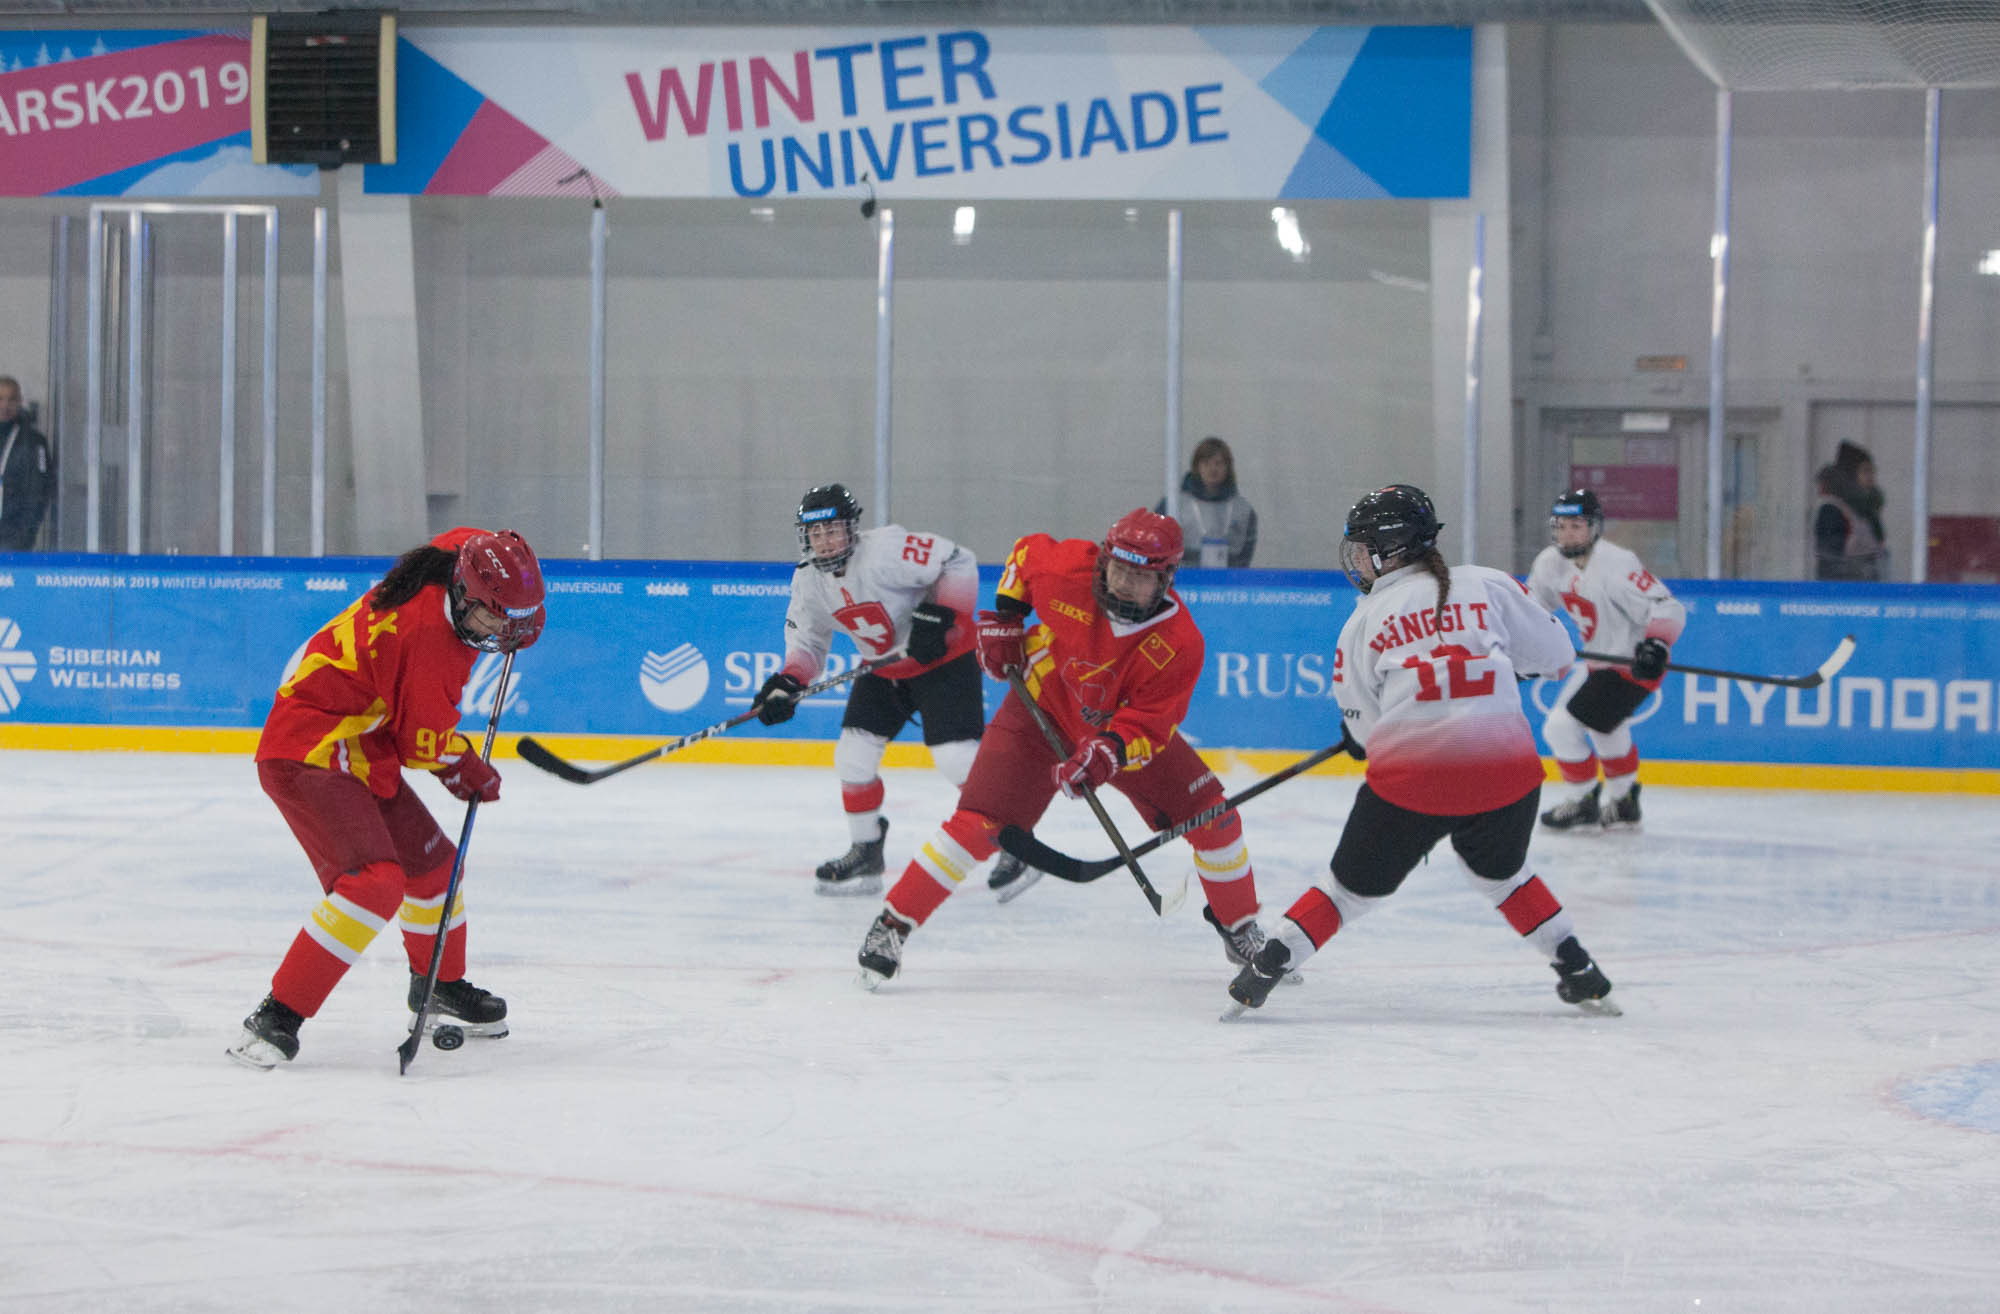 The ice hockey competition continued, with China defeating Switzerland 3-0 in the women's event ©Krasnoyarsk 2019